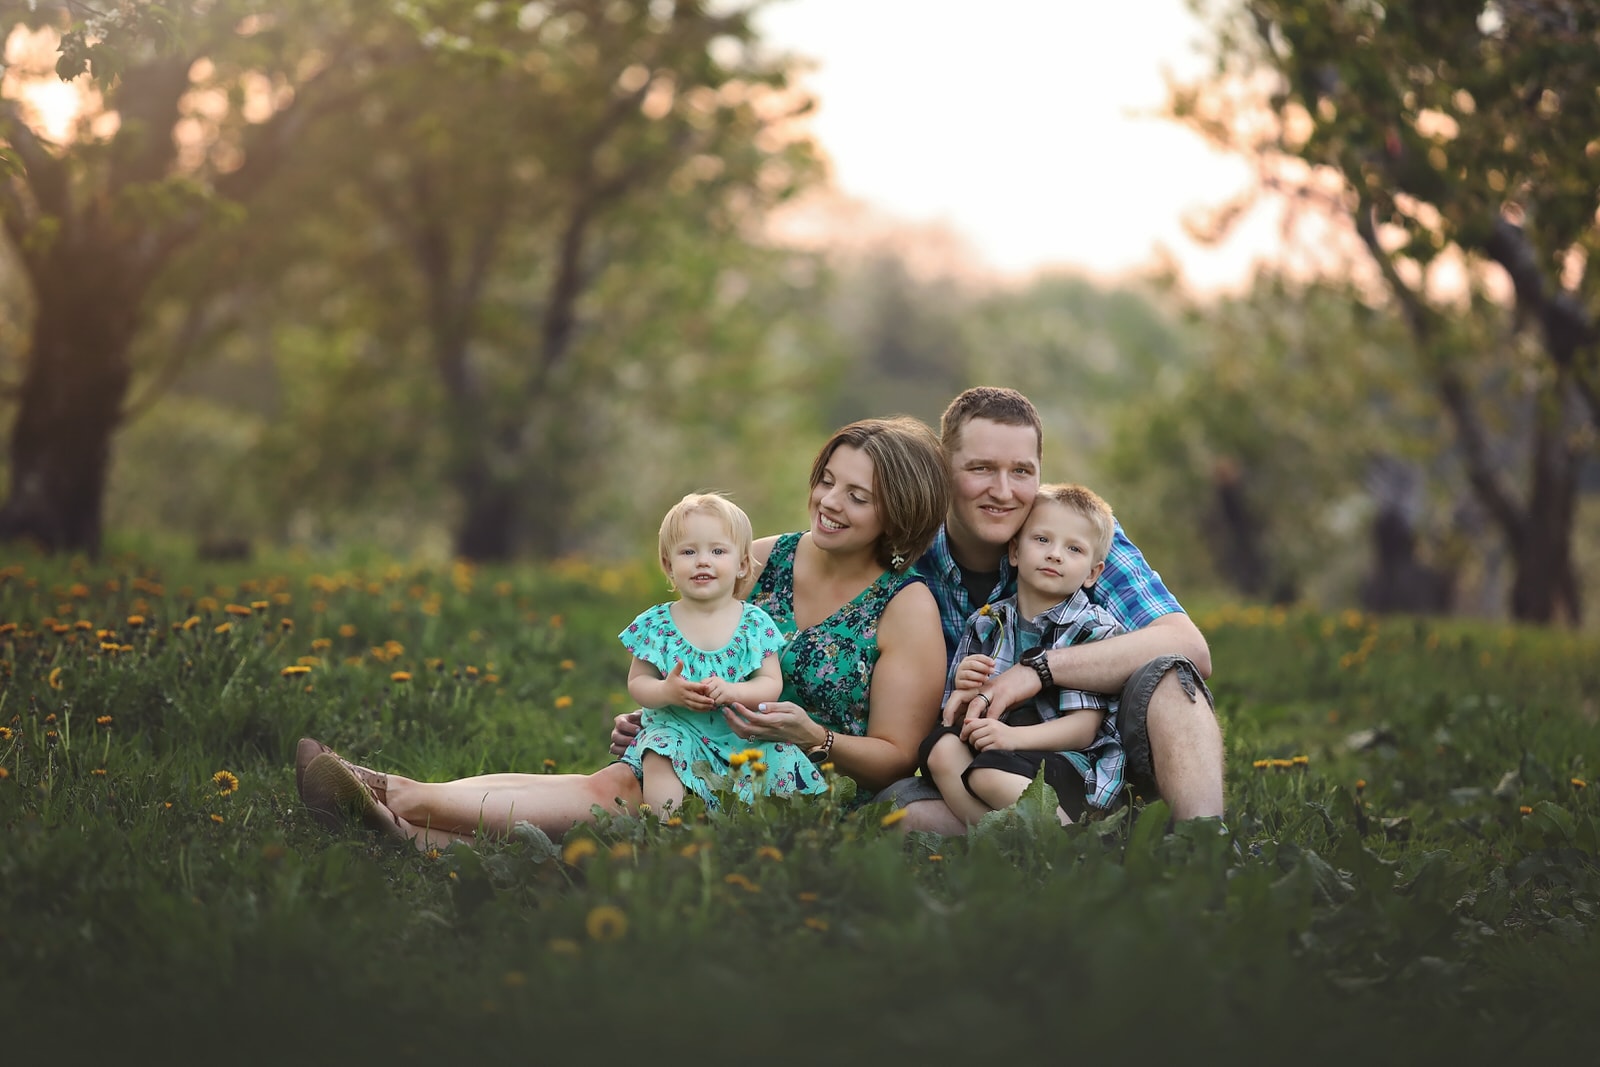 Camp Hill Family Photographer Karissa Zimmer Photography captures outdoor portrait for family of four